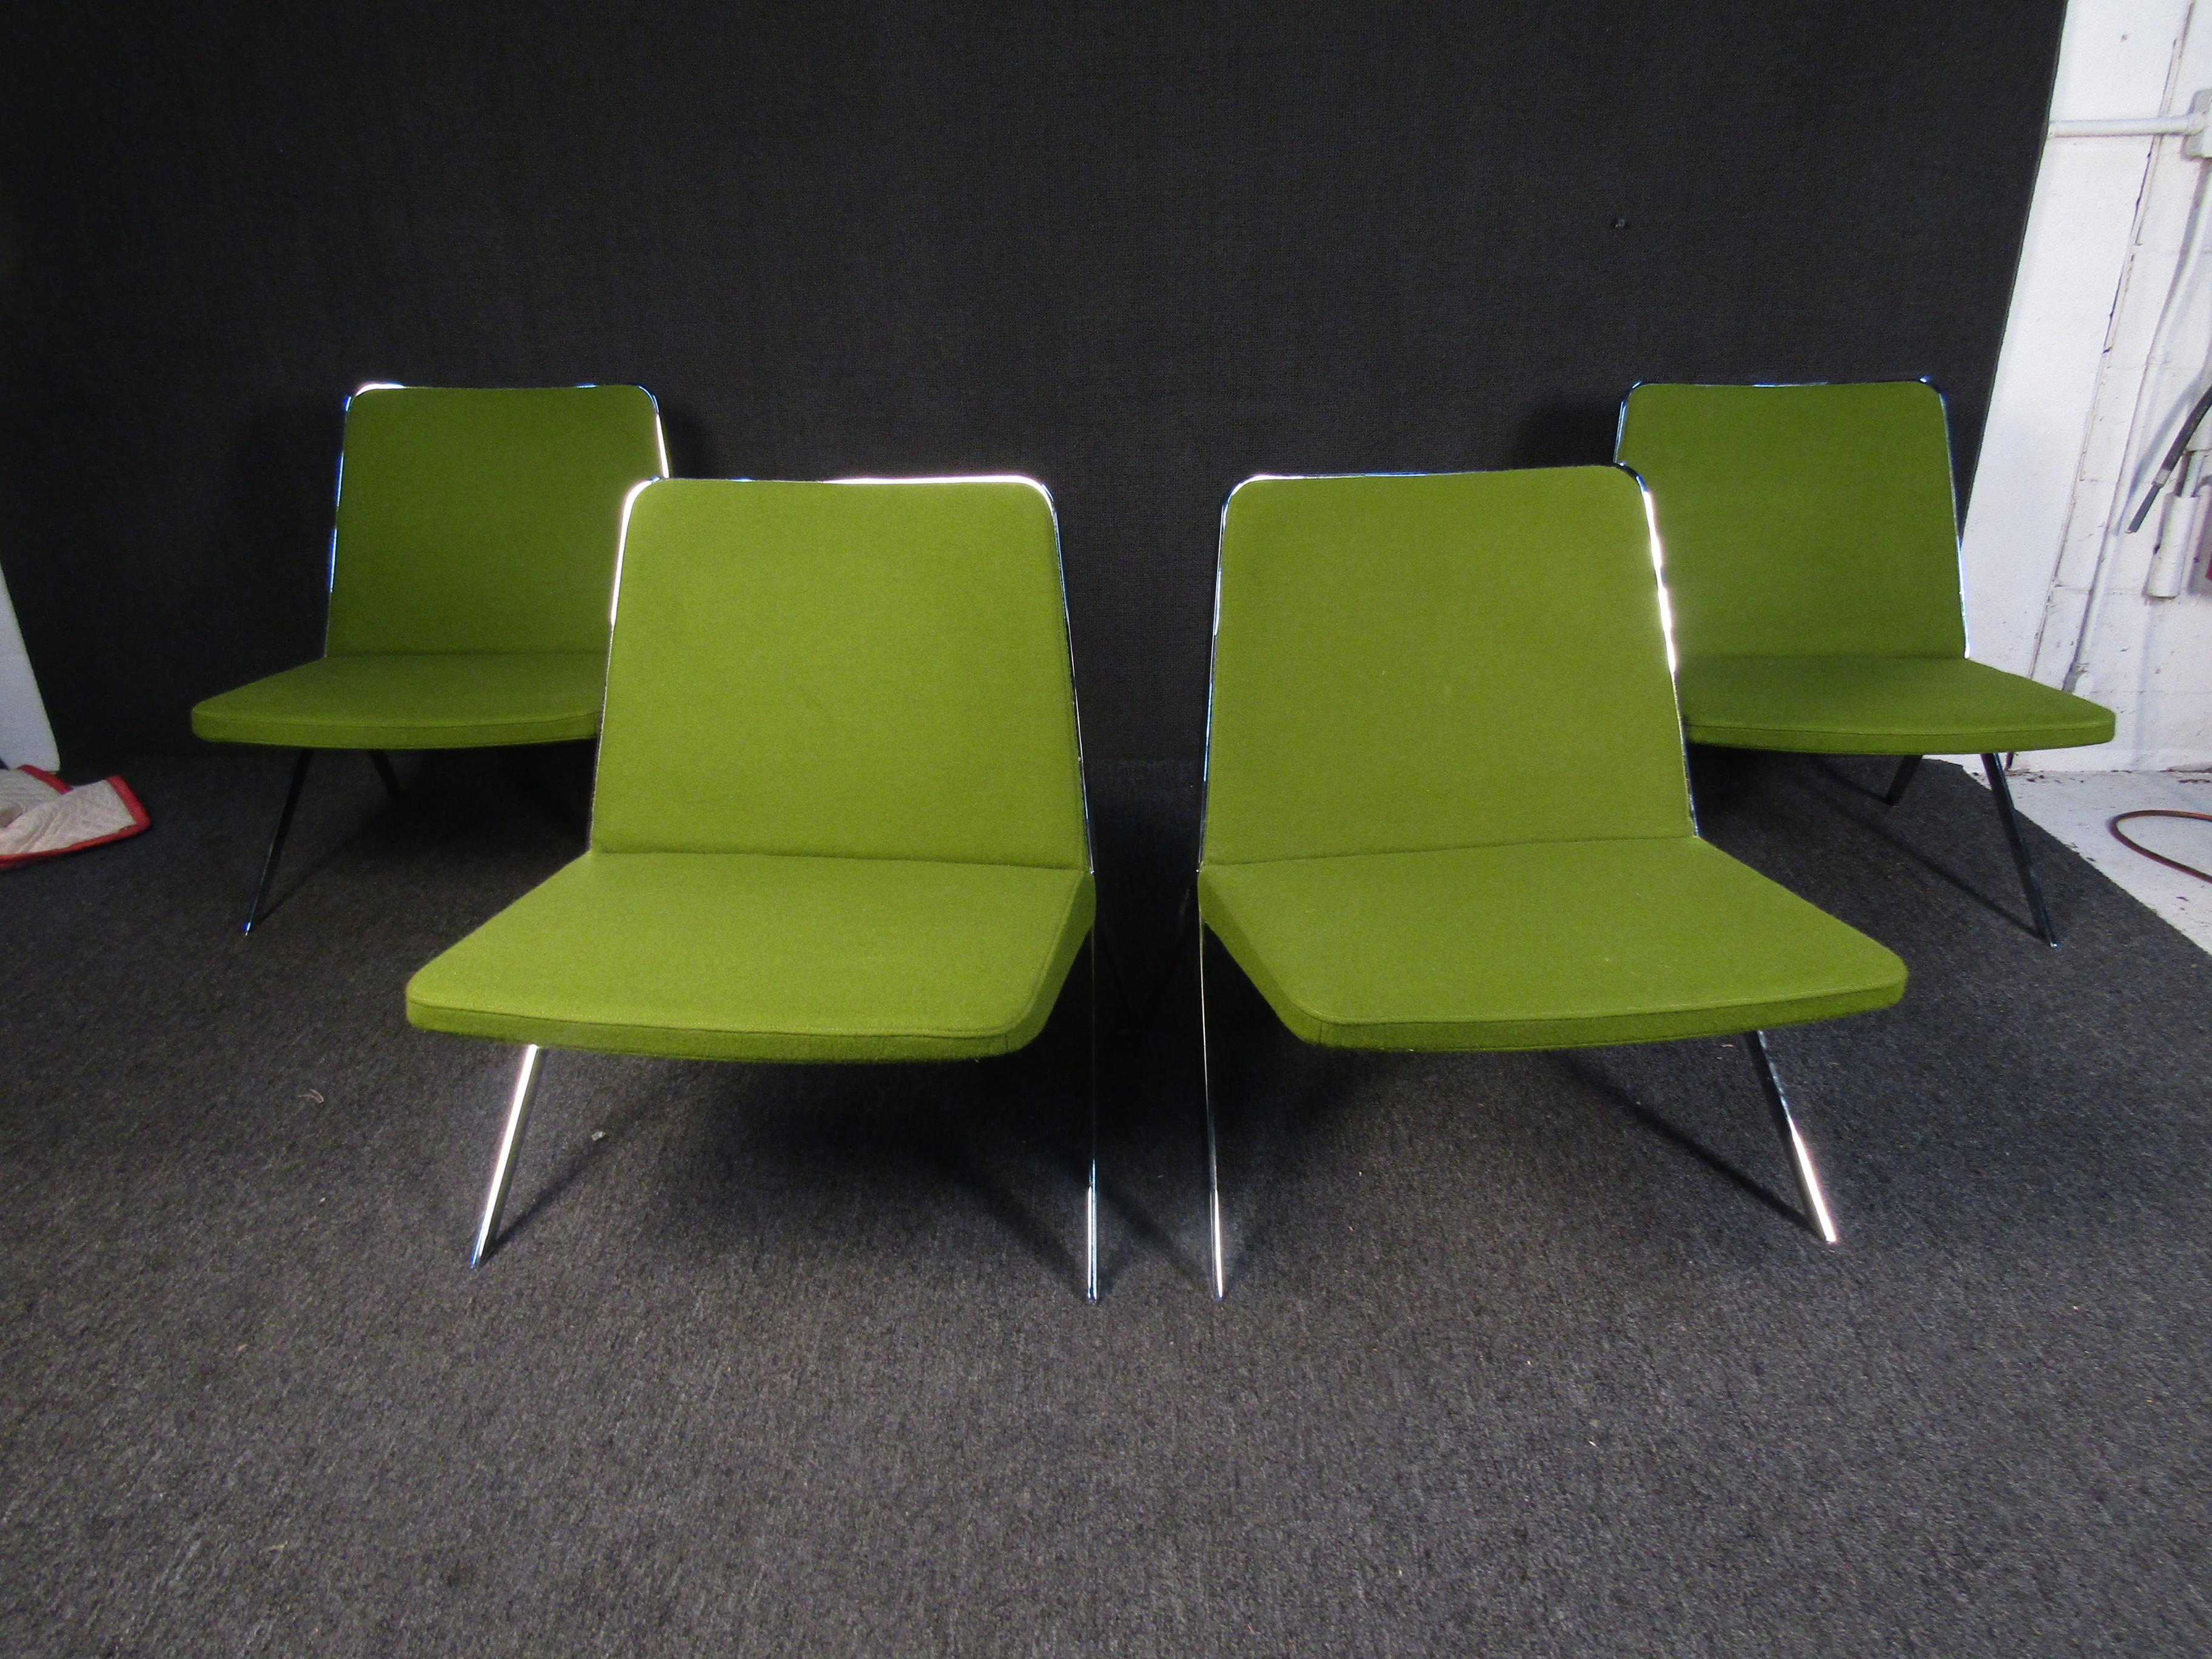 These Mid-Century Modern office chairs feature green fabric and a metal base. These chairs would be a perfect way to add vintage flare to an office or lounge space. 

 Please confirm item location with seller (NY/NJ).